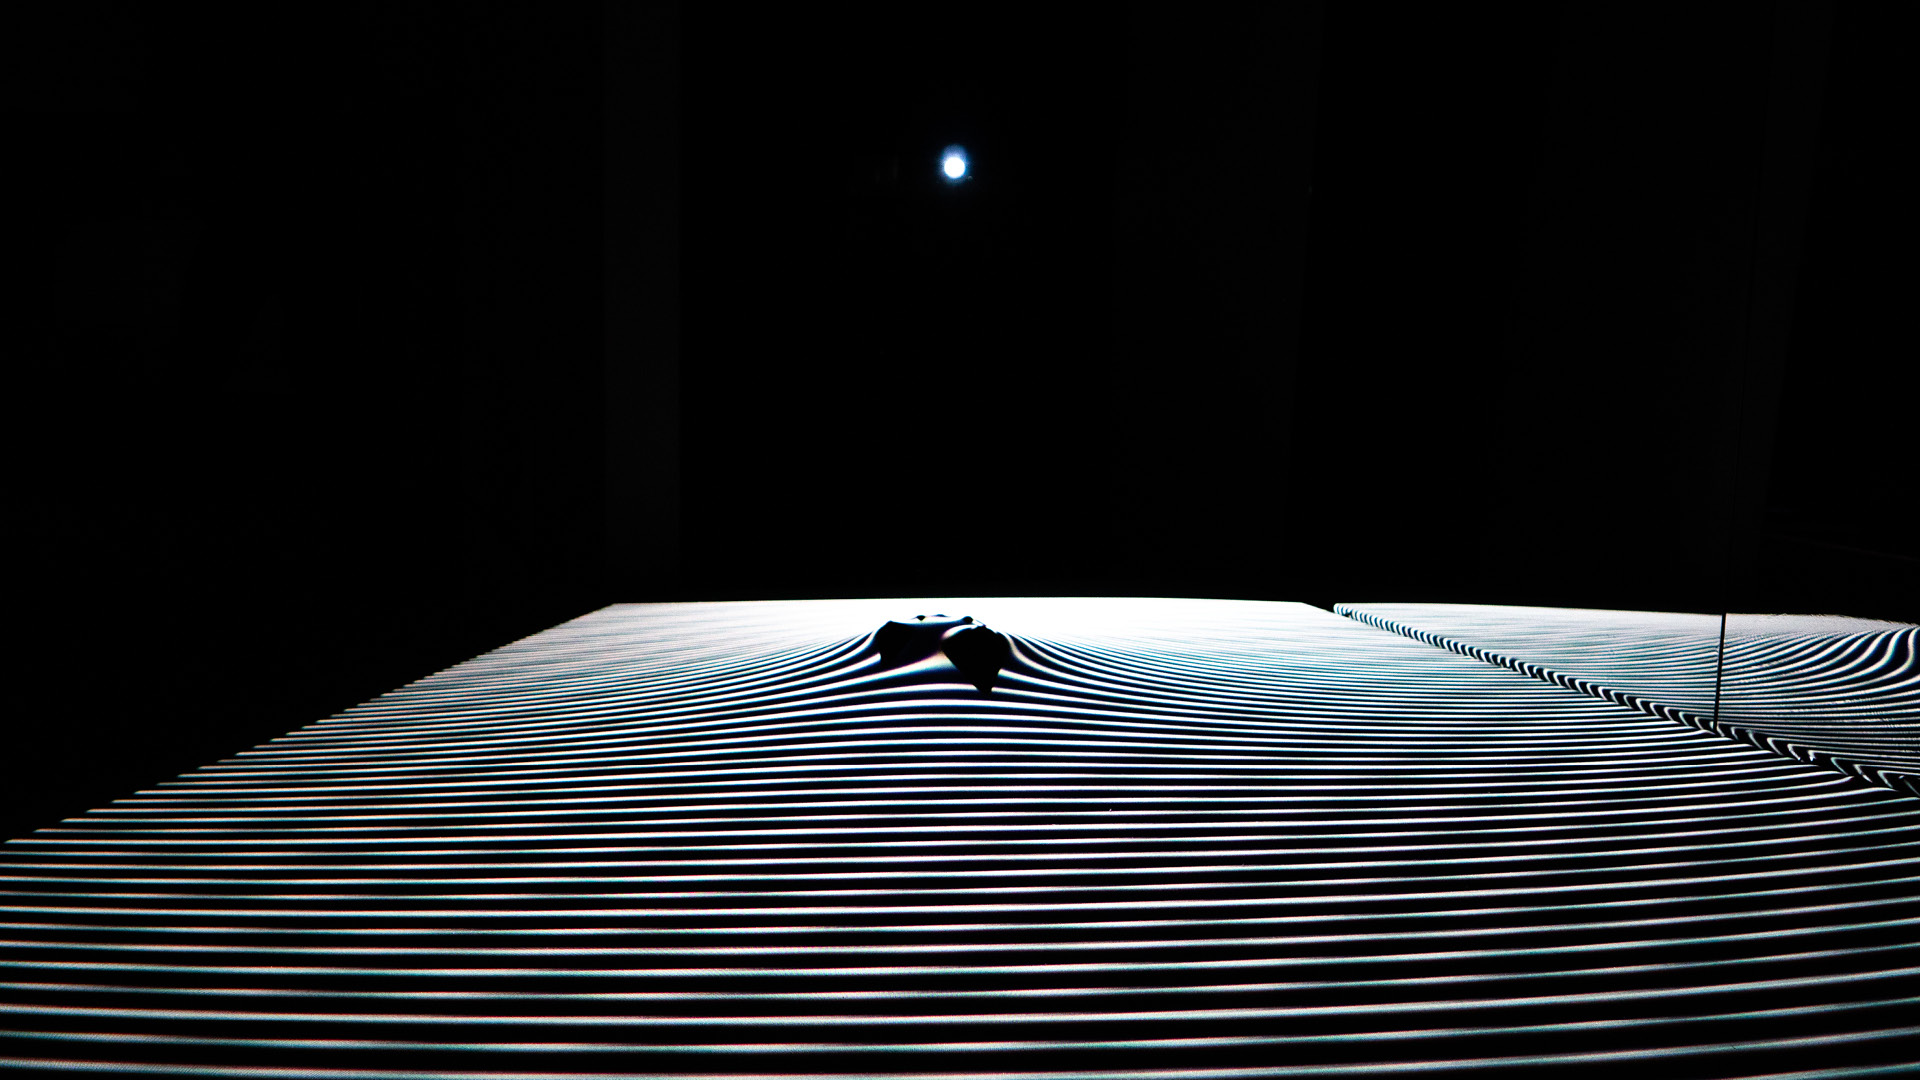    Contour    May 2019  Horizontal scrim with dancers beyond, in interaction with two projectors at different orientations; what results is a contoured artificial landscape.  Los Angeles Dance Project scenography residency  Creative Directors - Erin 